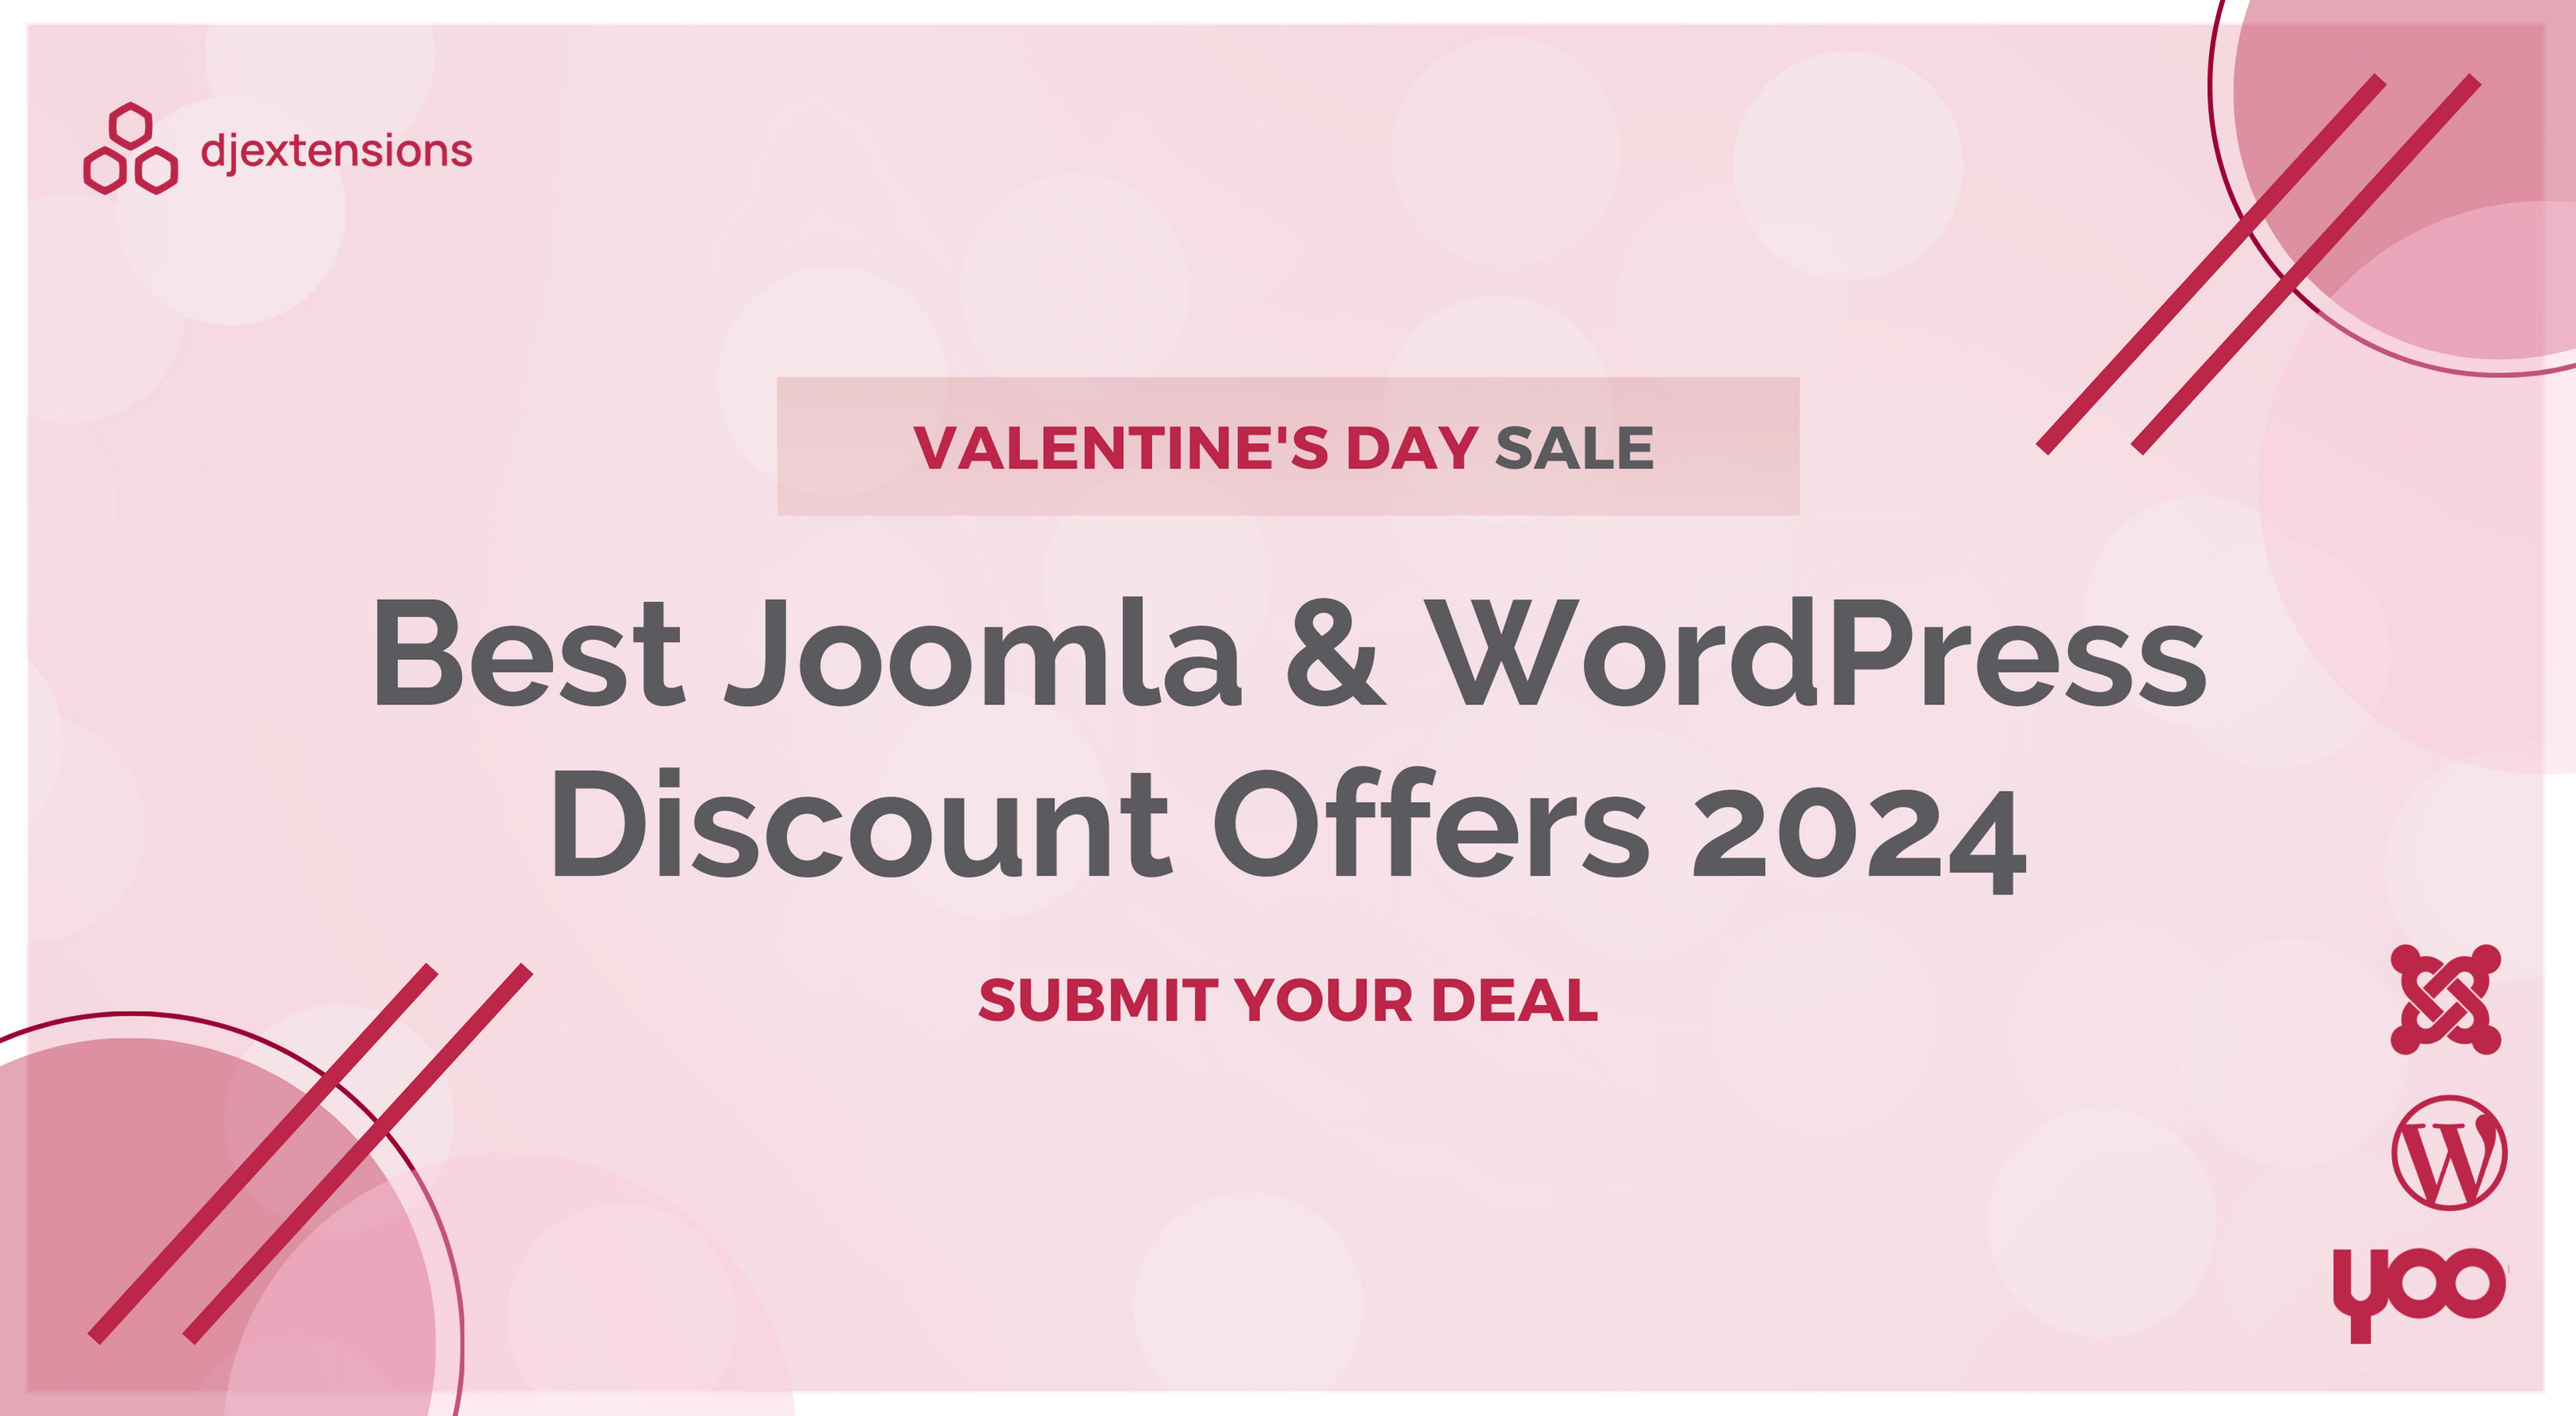 valentines-day-submit-offer